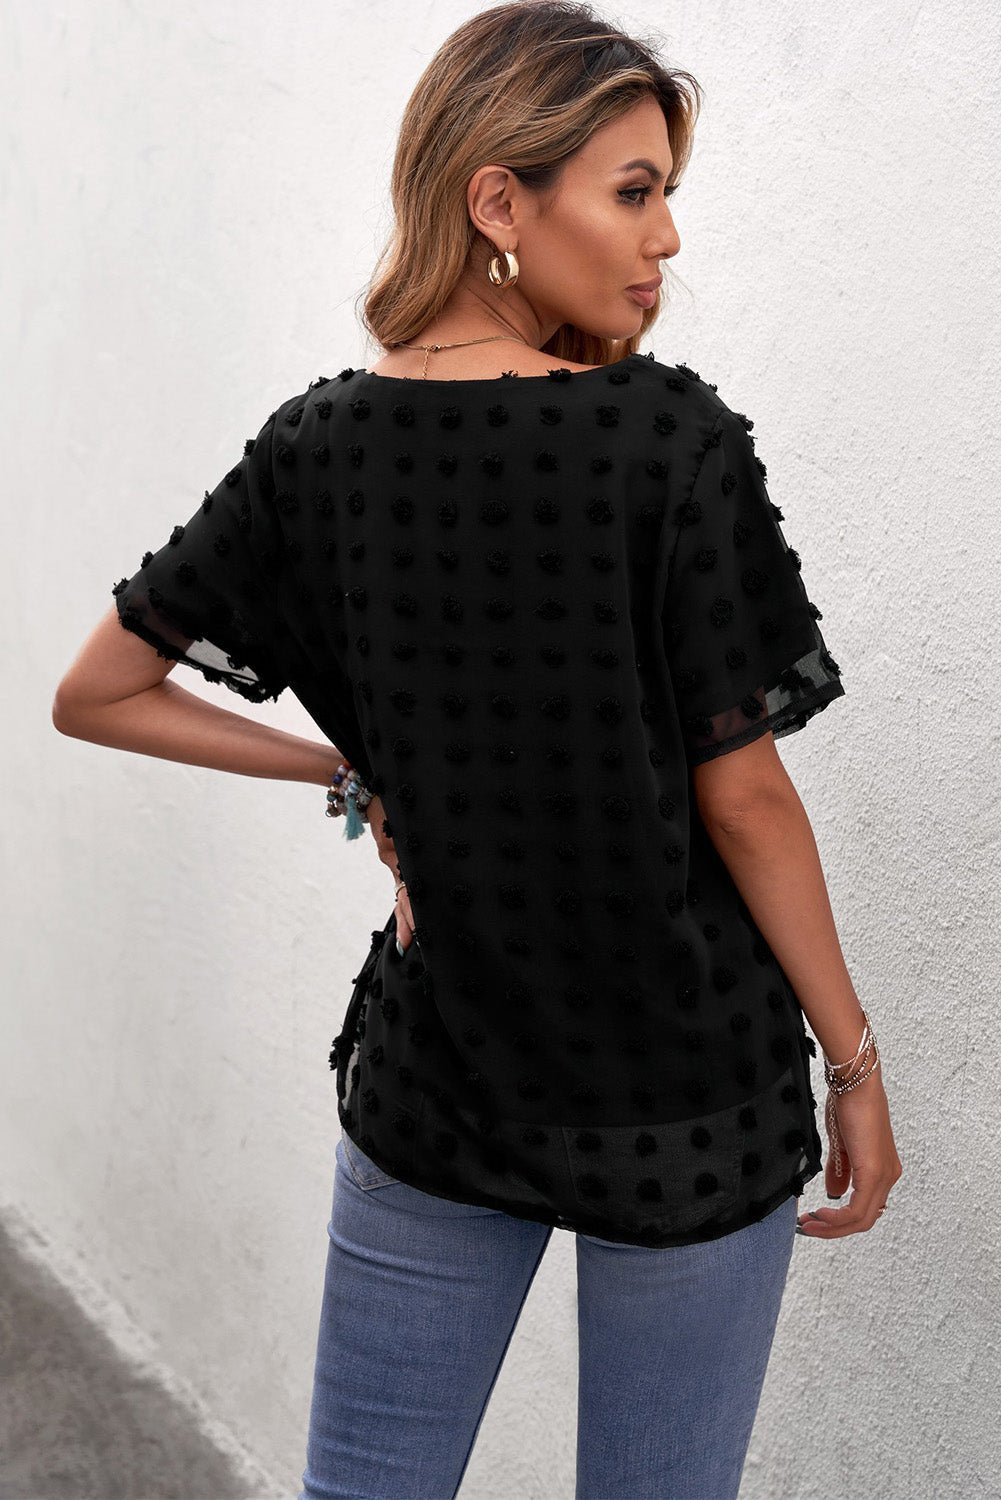 Polka Dot Sheer Blouse - black blouse with polka dots that has short sleeves and a round neck. #Firefly Lane Boutique1